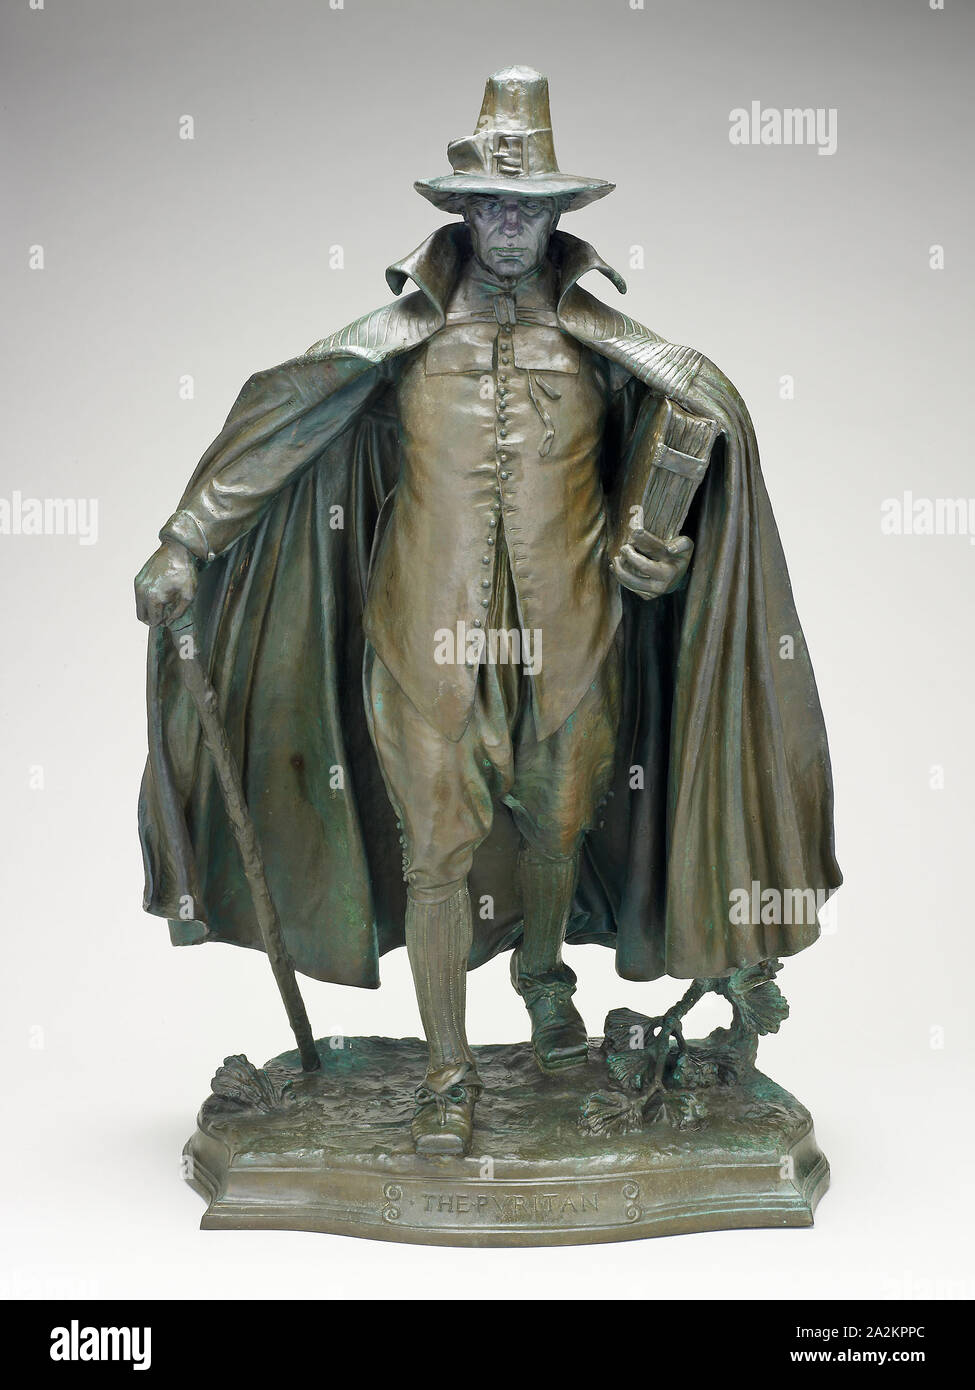 The Puritan, Modeled 1883–86, cast after 1899, Augustus Saint-Gaudens, American, born Ireland, 1848–1907, United States, Bronze, 77.5 × 50.8 × 33 cm (30 1/2 × 20 × 13 in Stock Photo